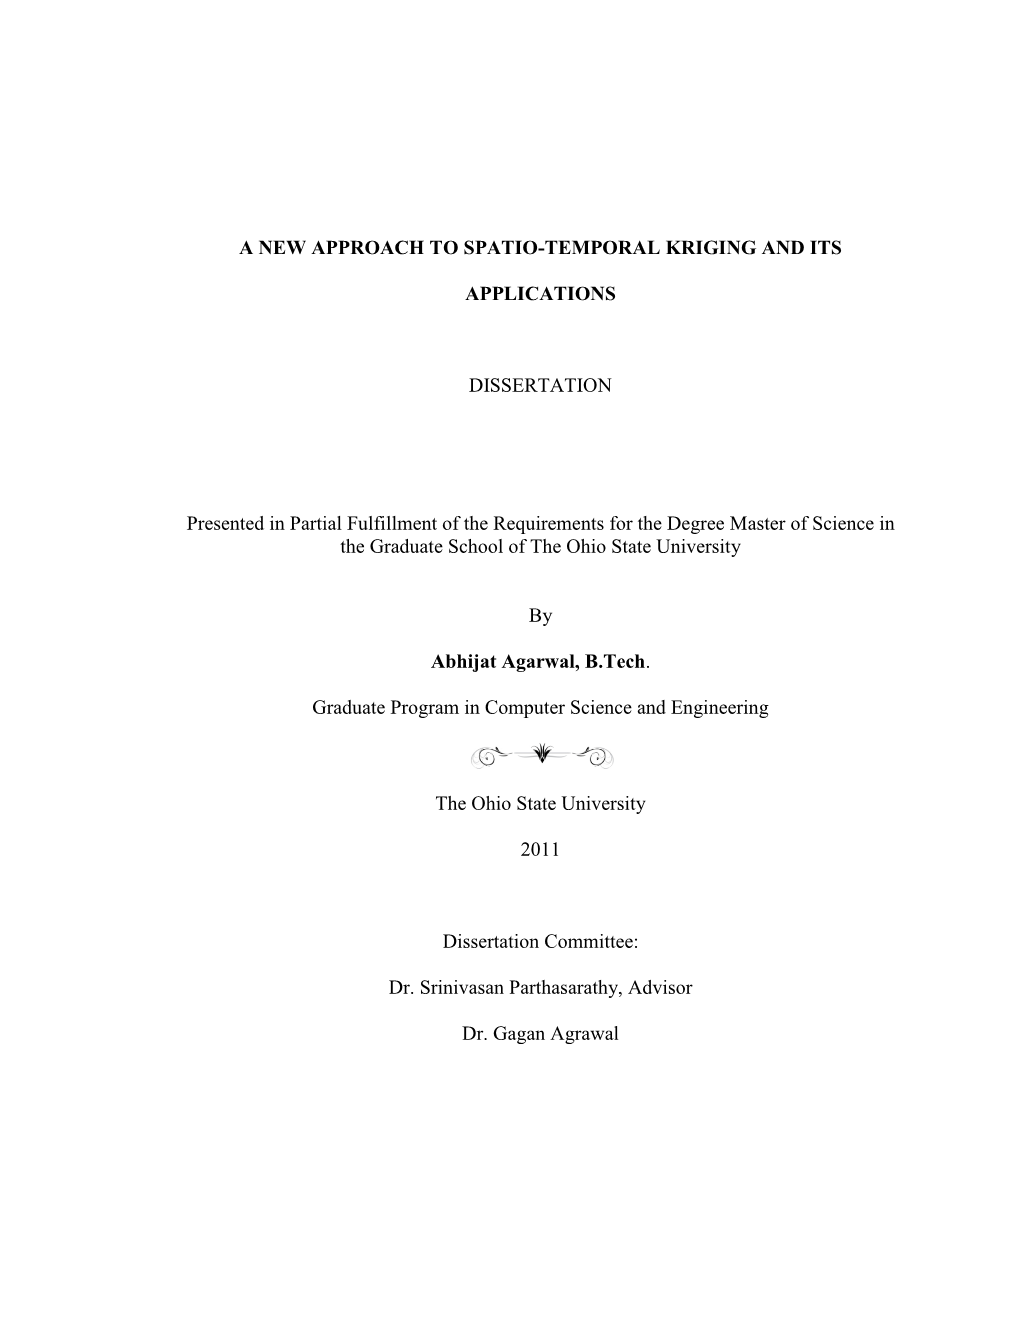 A NEW APPROACH to SPATIO-TEMPORAL KRIGING and ITS APPLICATIONS DISSERTATION Presented in Partial Fulfillment of the Requirements